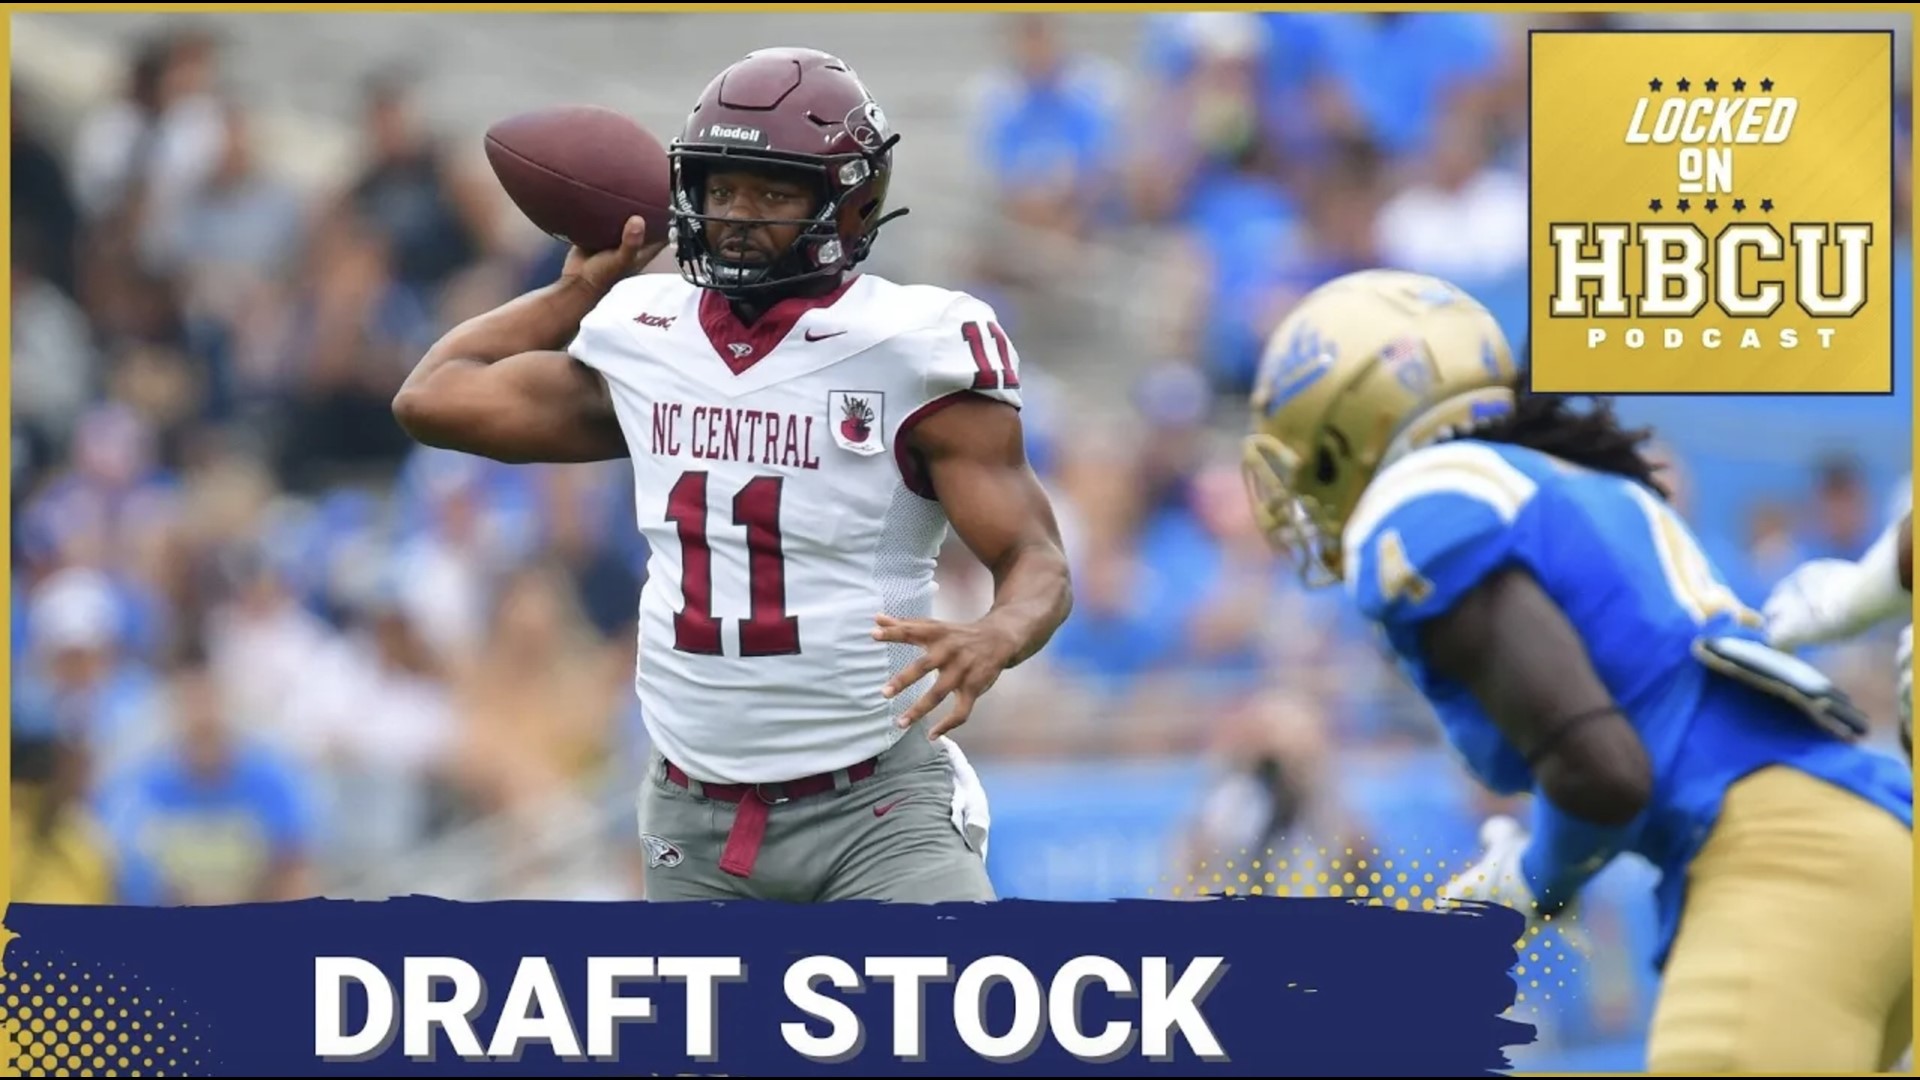 Davius Richard gives a health update that should help his NFL draft stock. The NCAA has changed the transfer portal rules for players to have unlimited transfers.